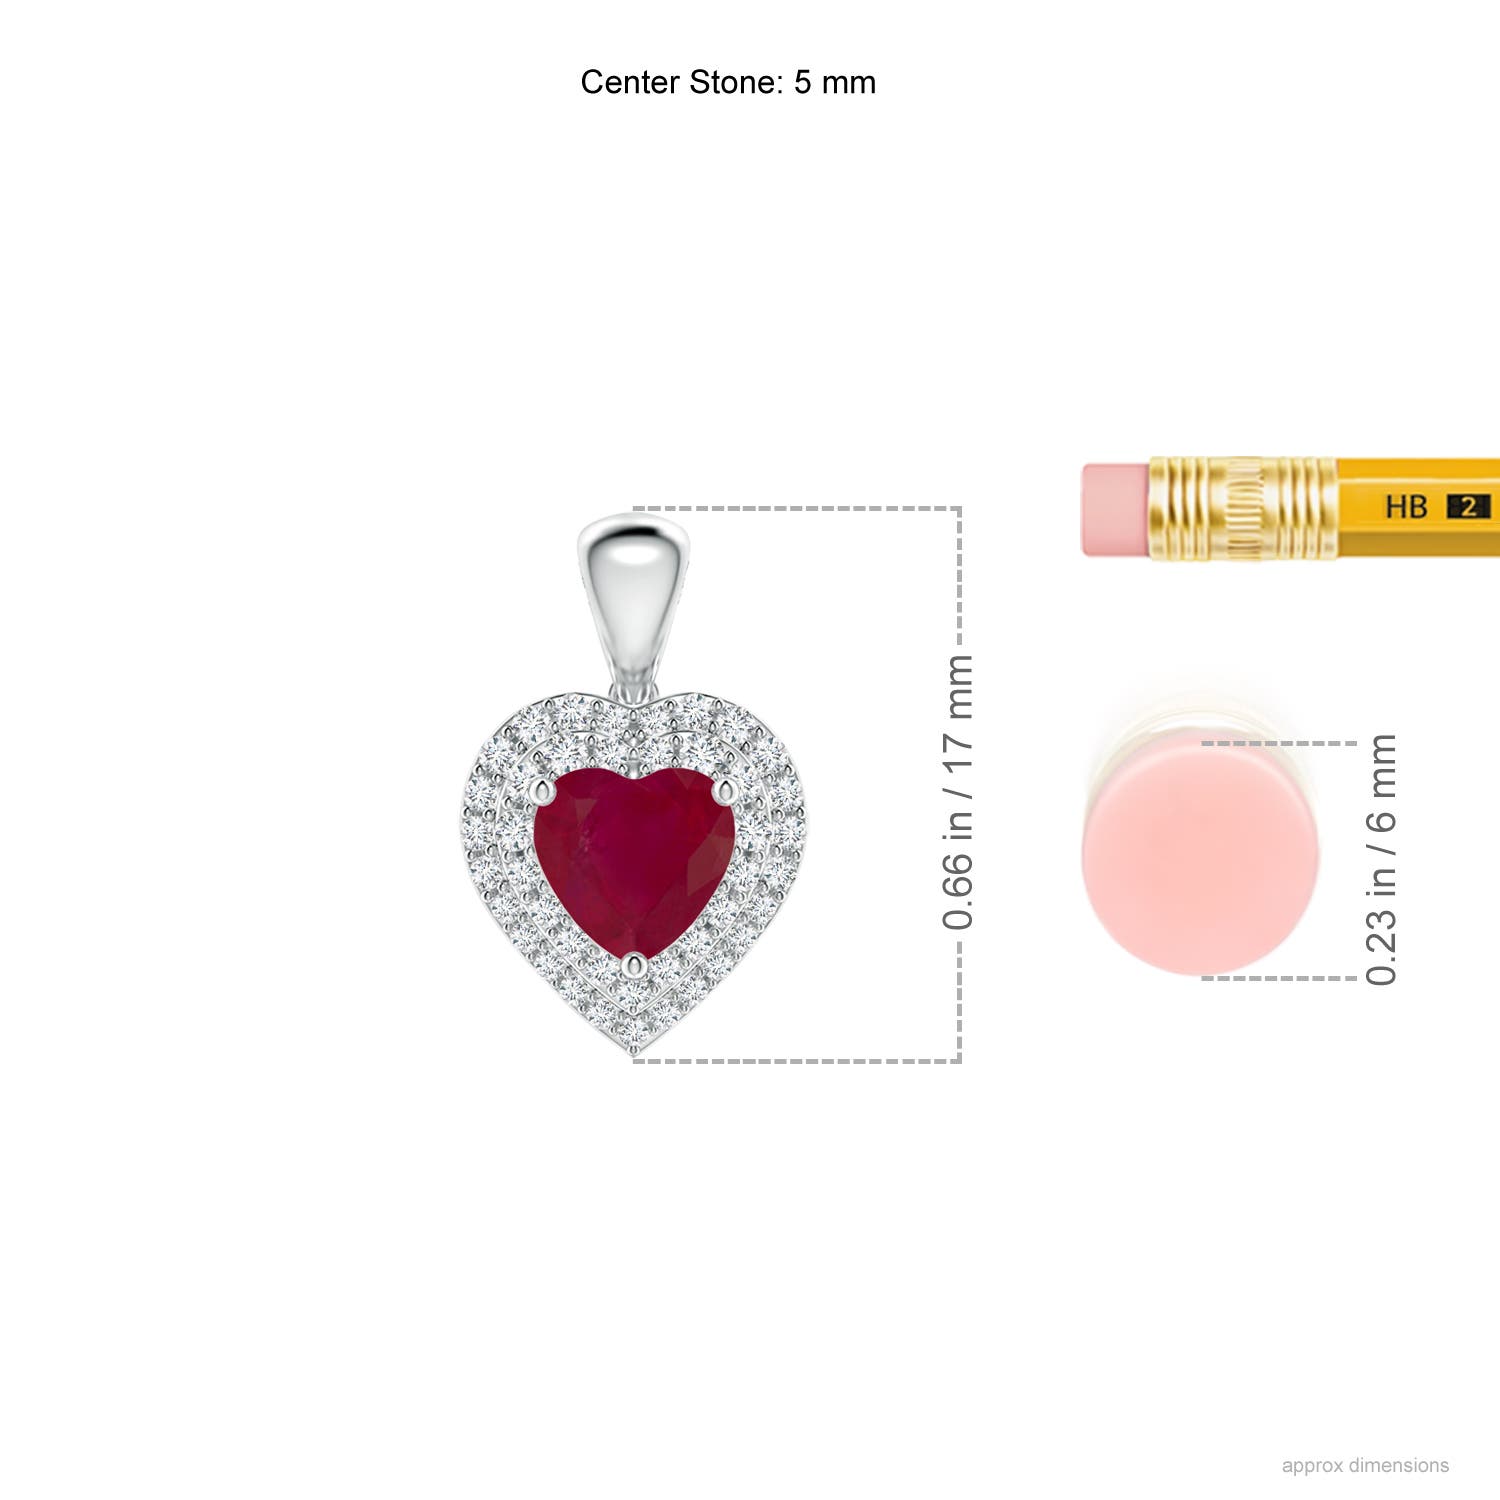 A - Ruby / 0.94 CT / 14 KT White Gold